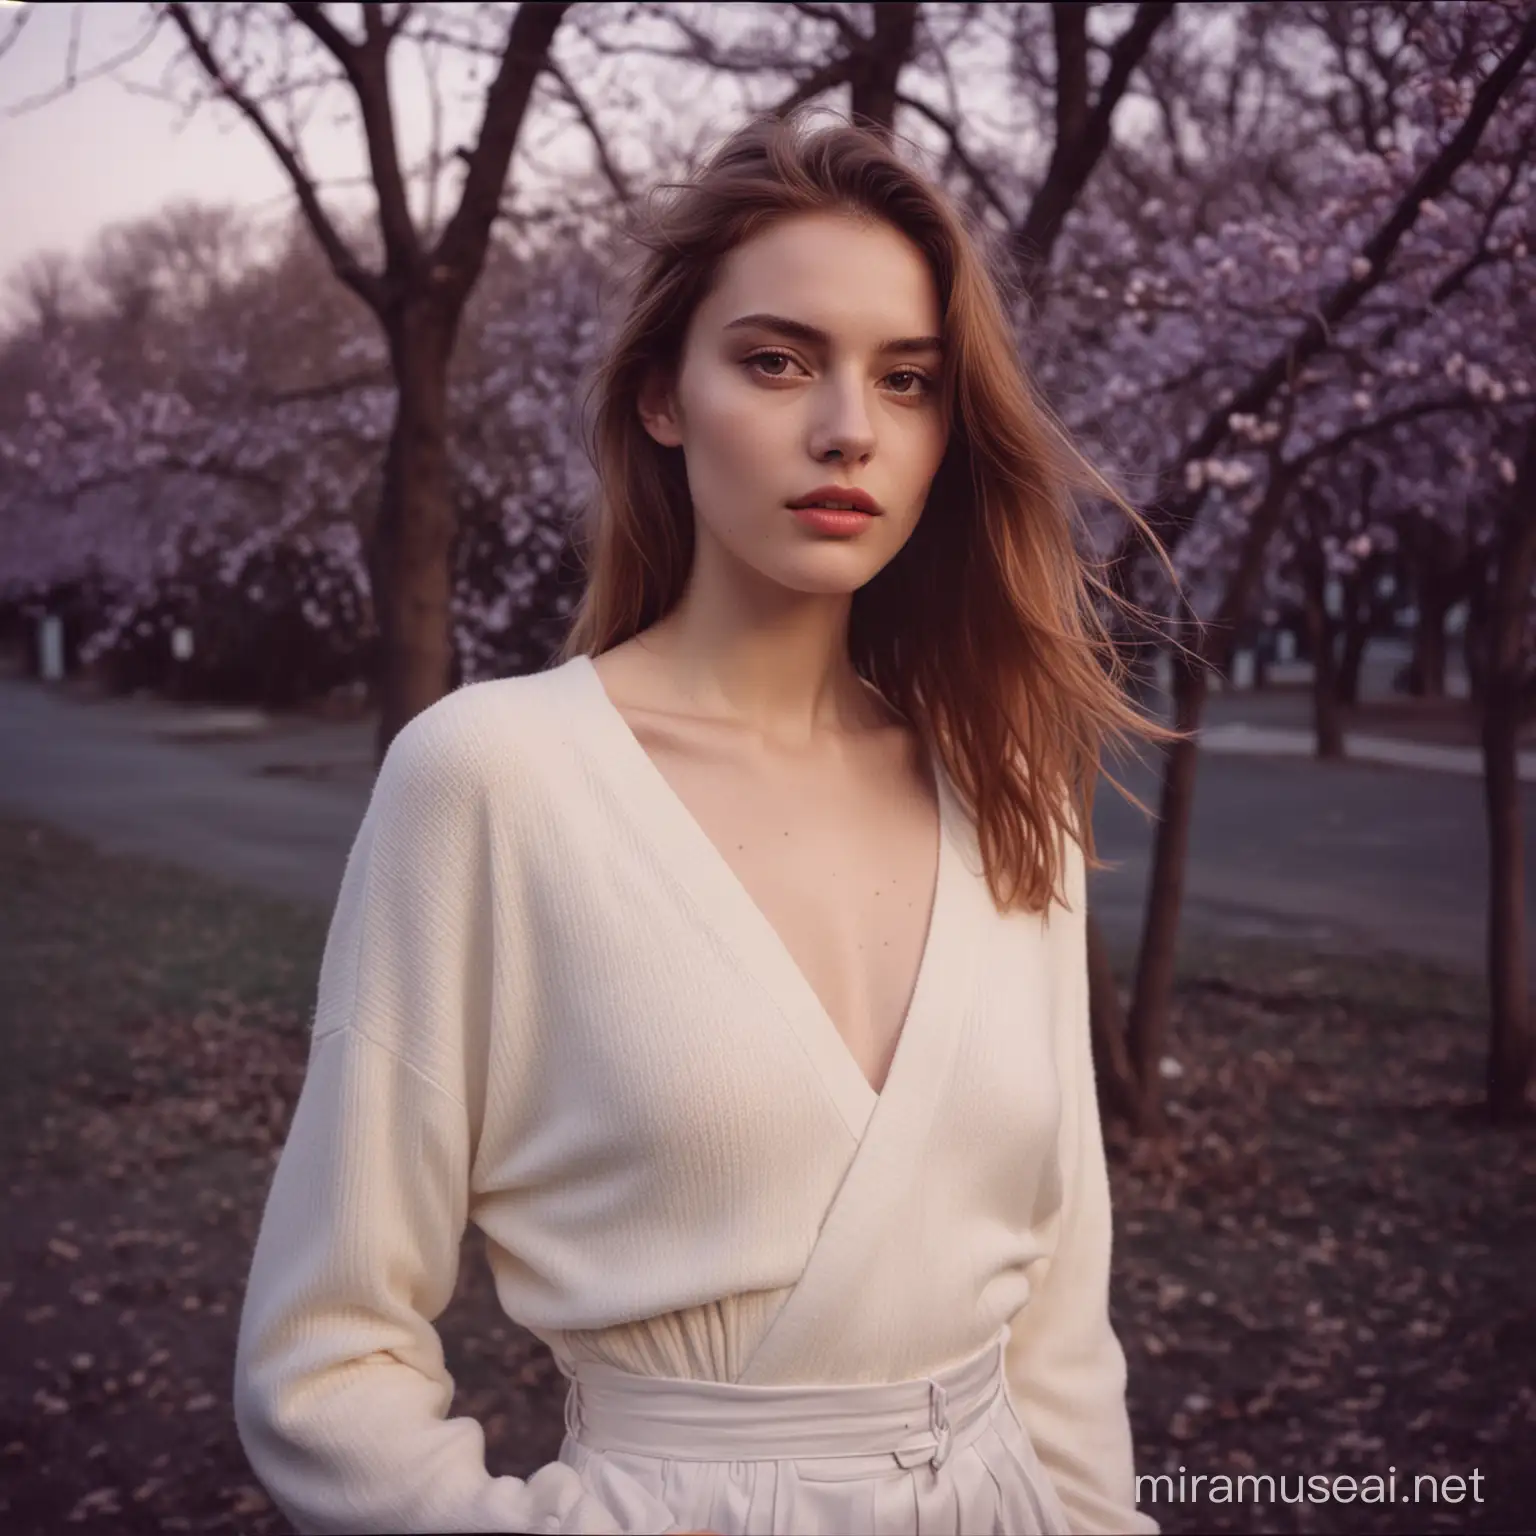 Elegant Springtime Fashion Editorial Ethereal Beauty in the Dusk